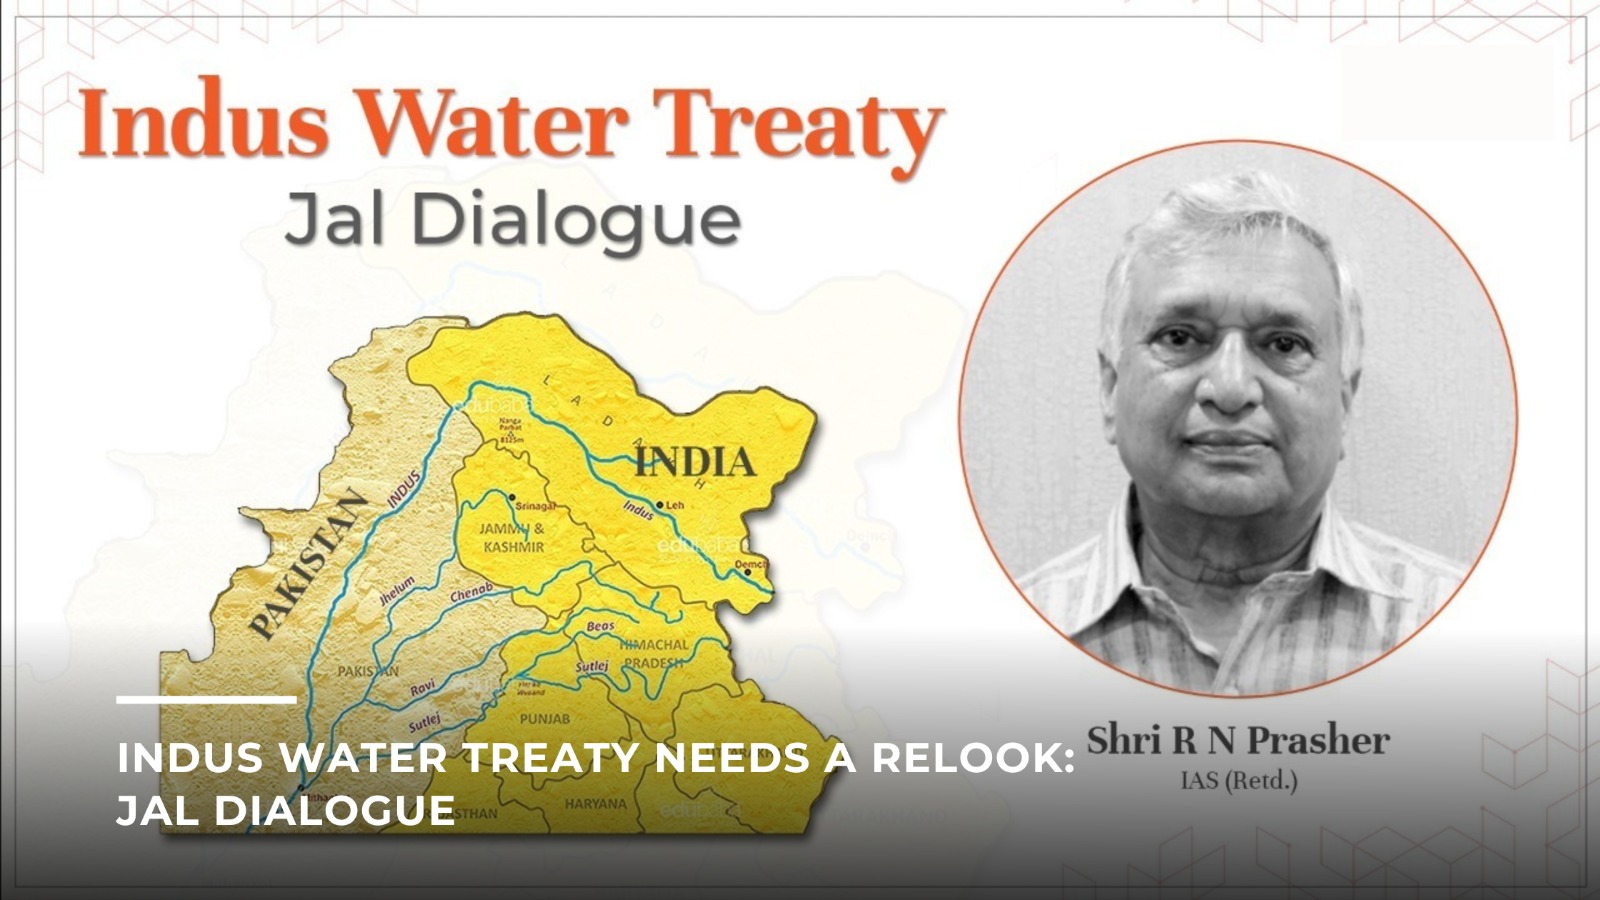 Indus Water Treaty Needs a Relook: Jal Dialogue